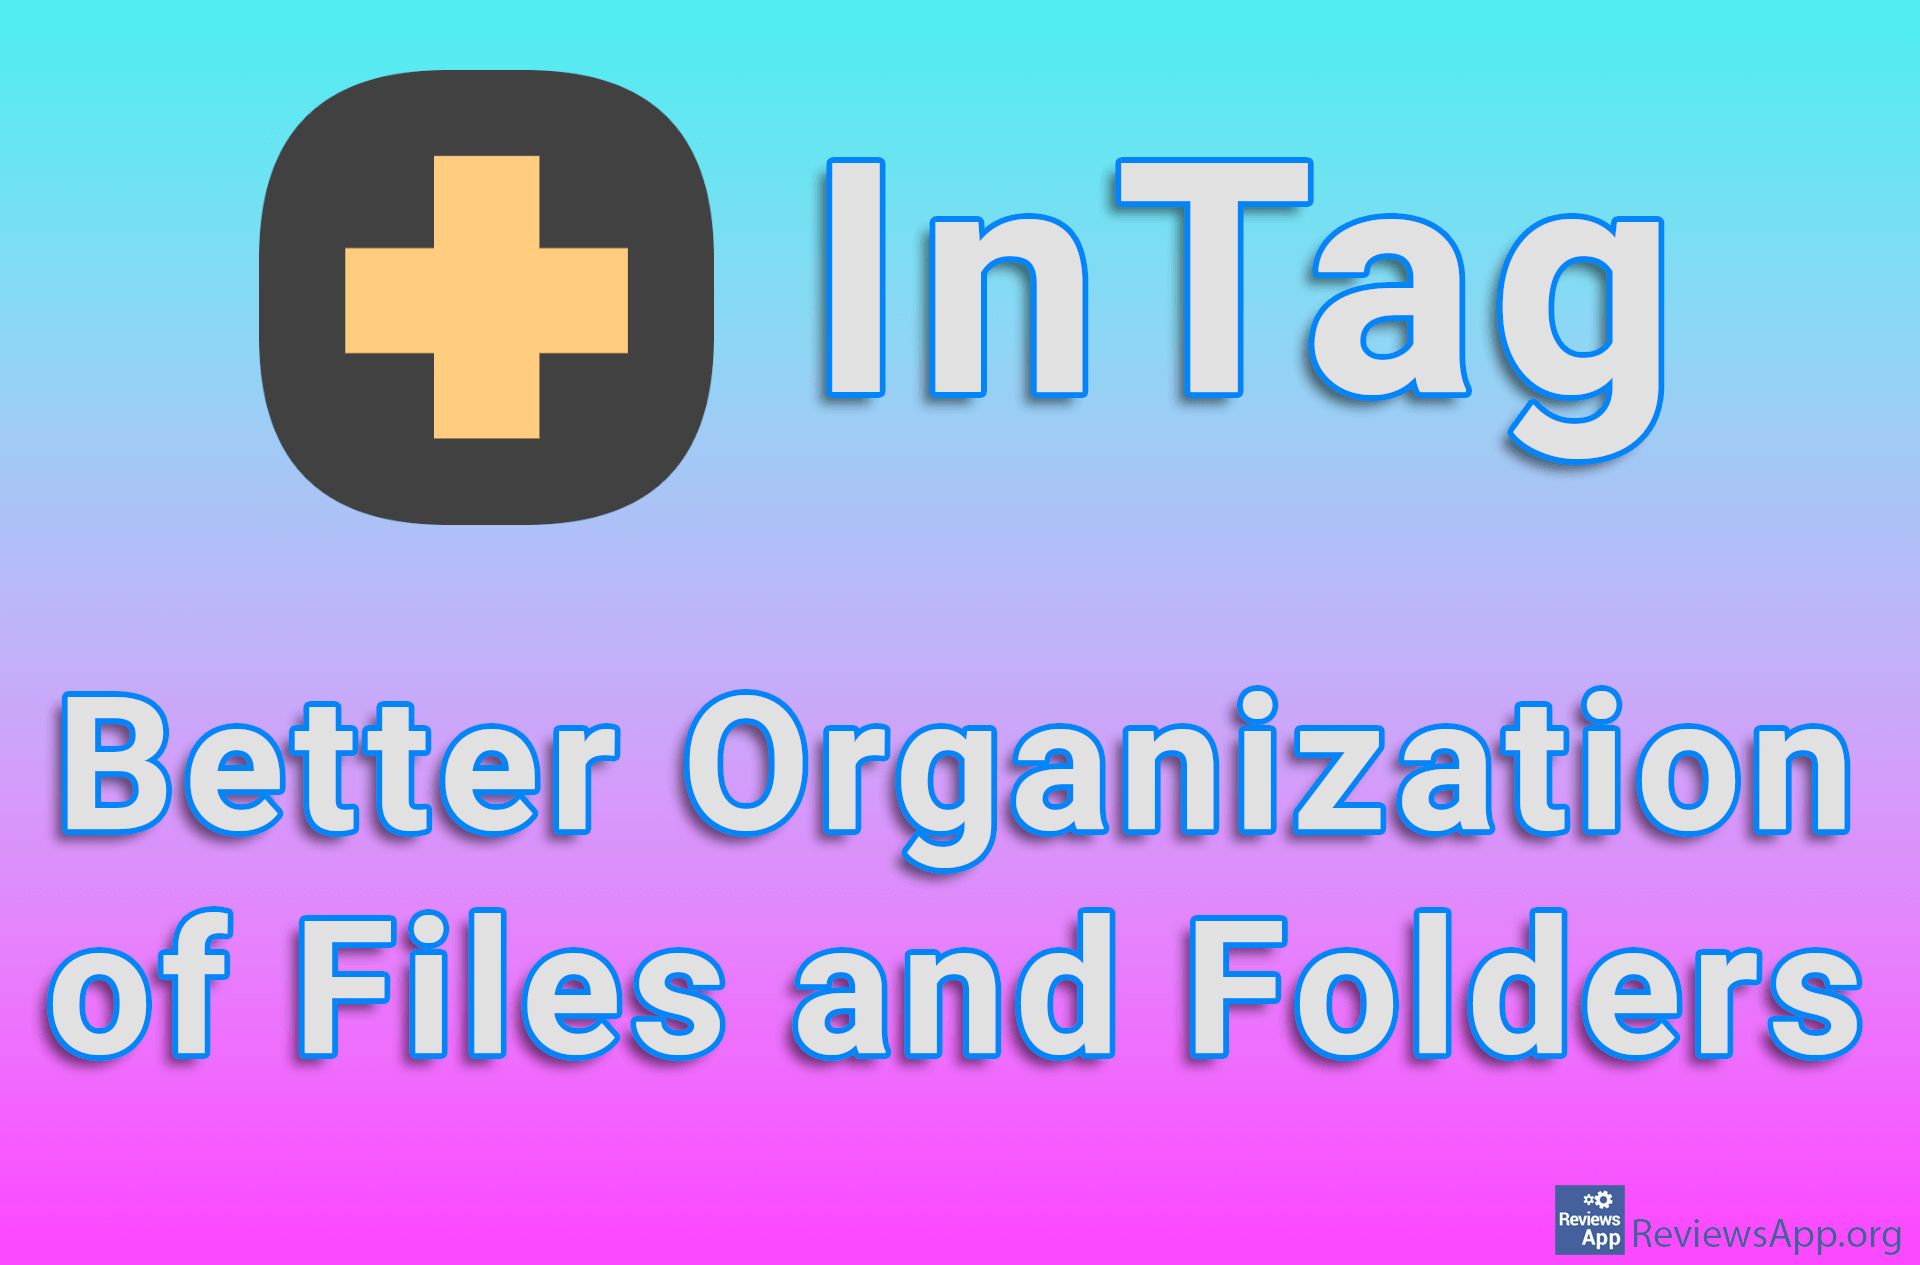 InTag – Better Organization of Files and Folders